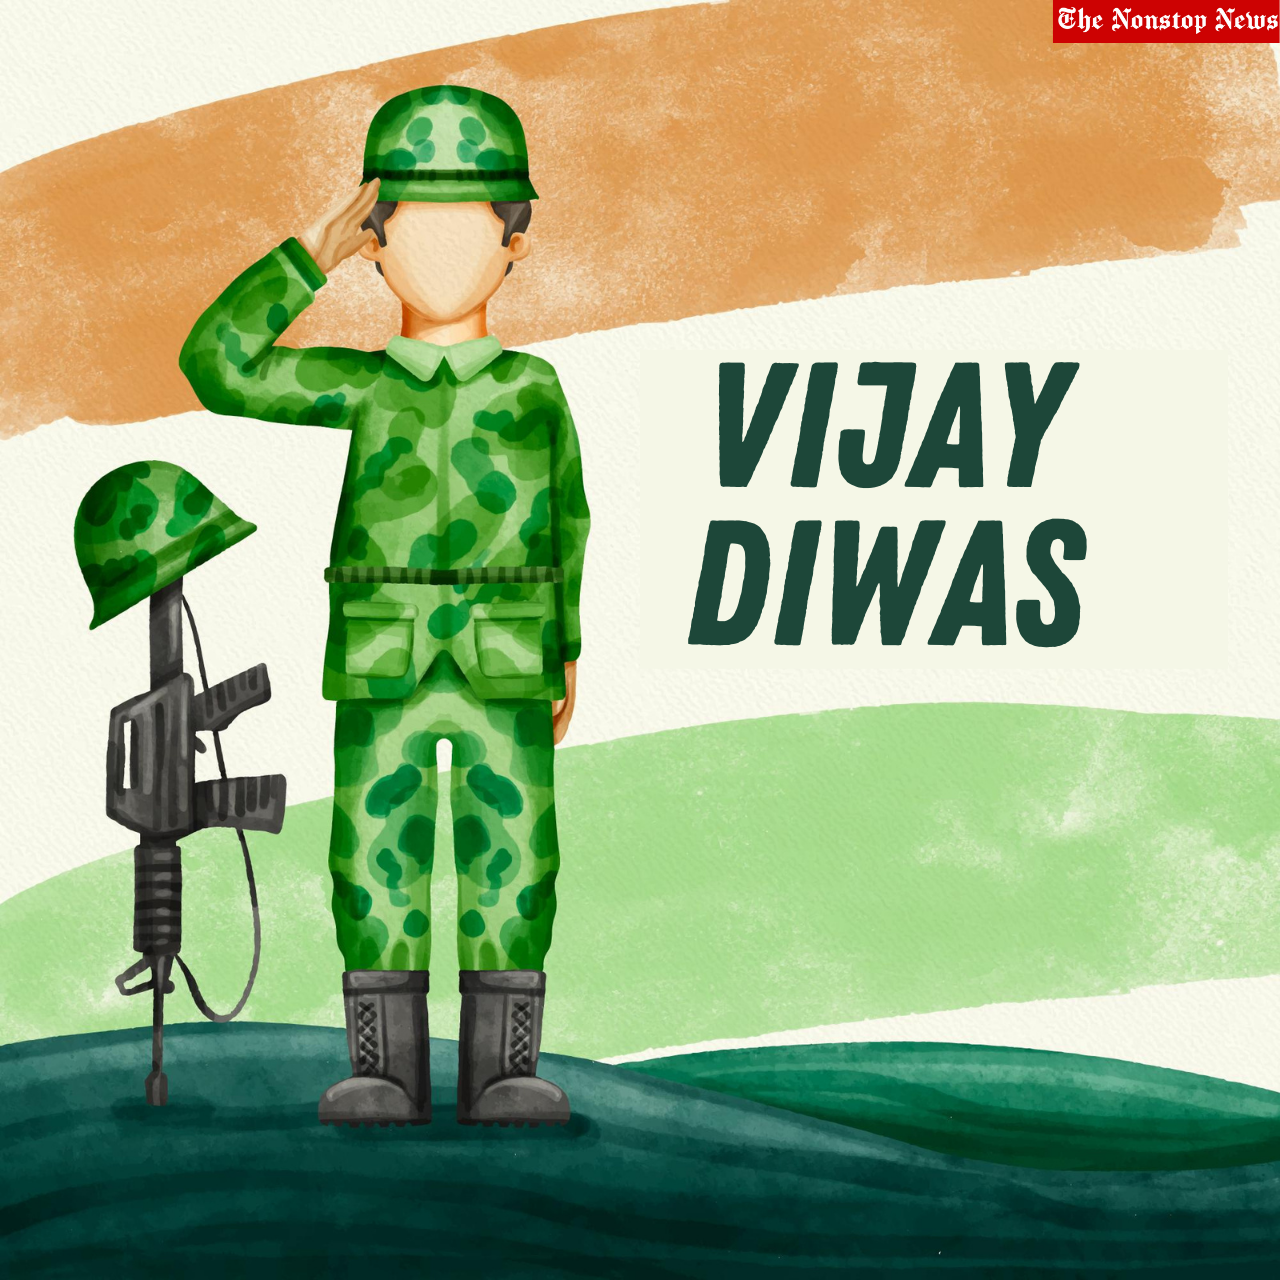 Vijay Diwas 2021 Instagram Caption, Facebook Poster, WhatsApp Images, Twitter Quotes, and Banners to Share